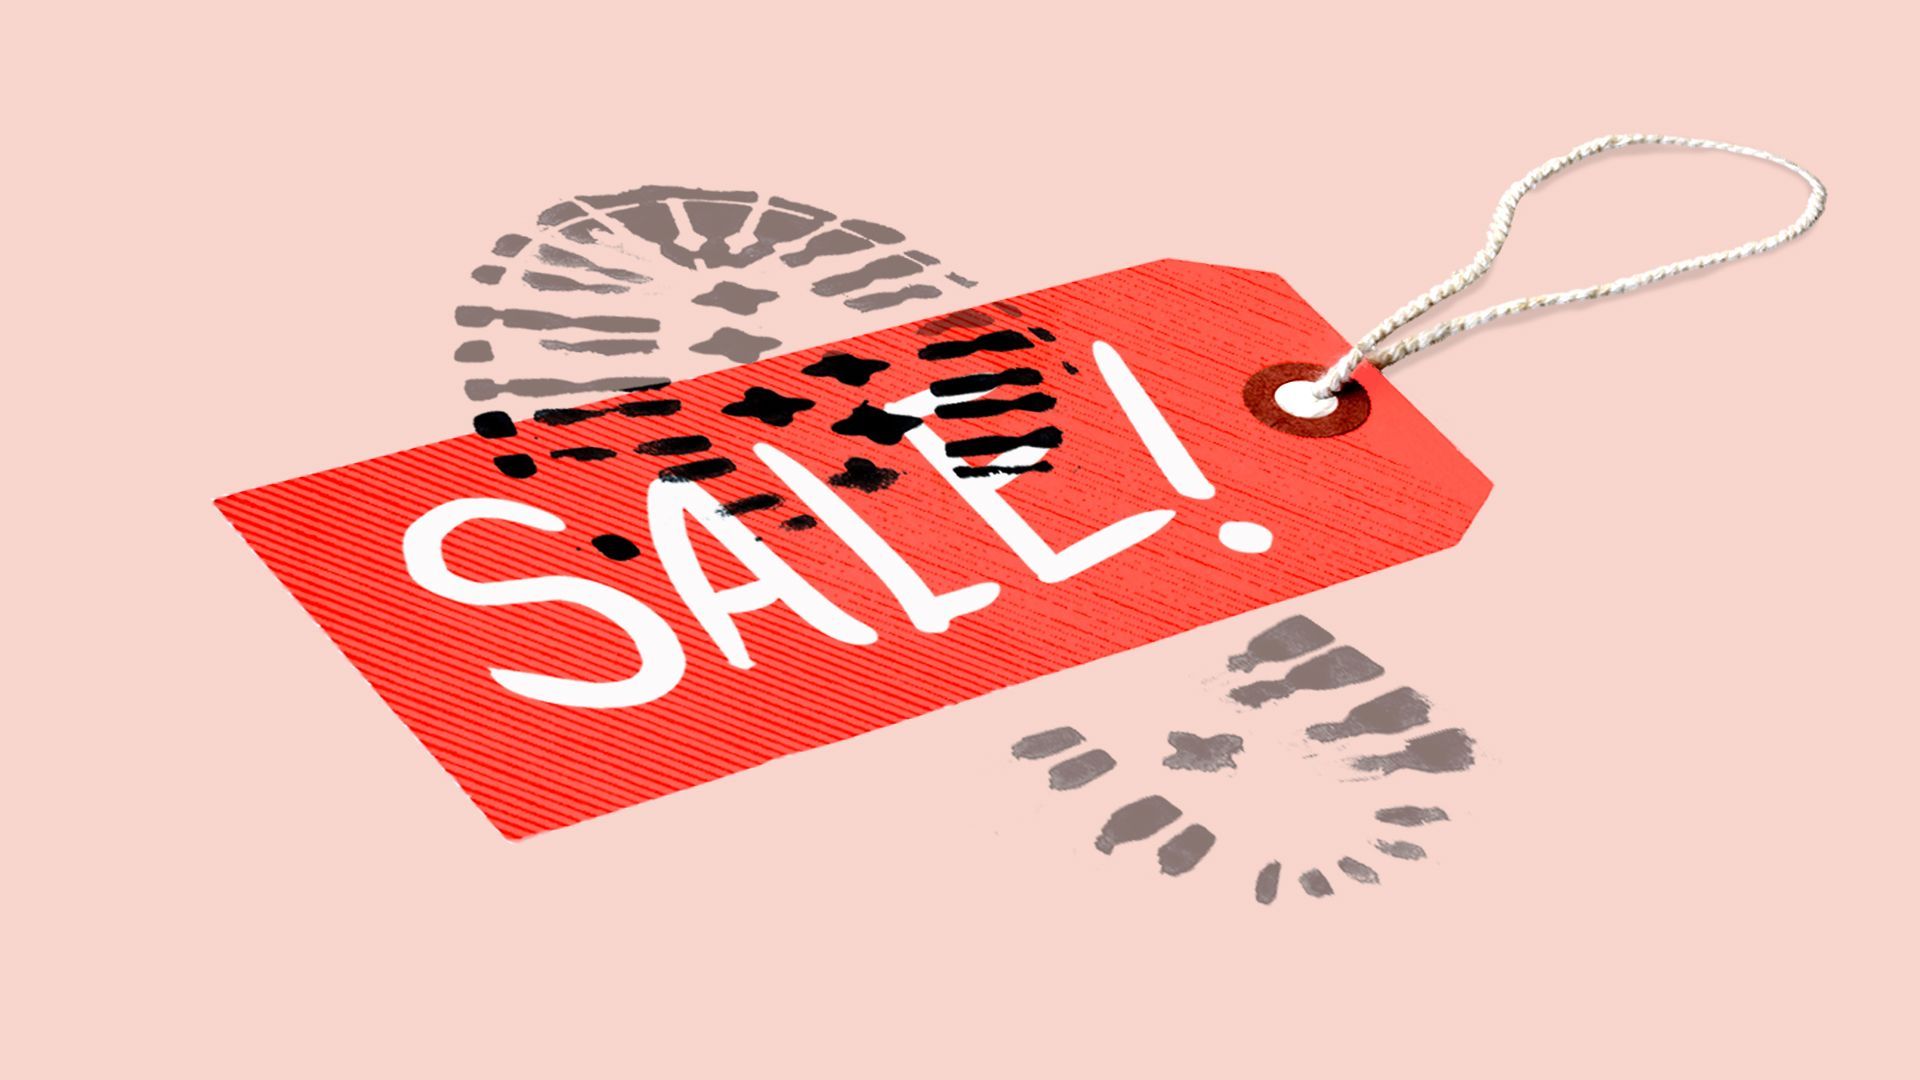 Illustration of Black Friday holiday sale tag on ground with footprint over it